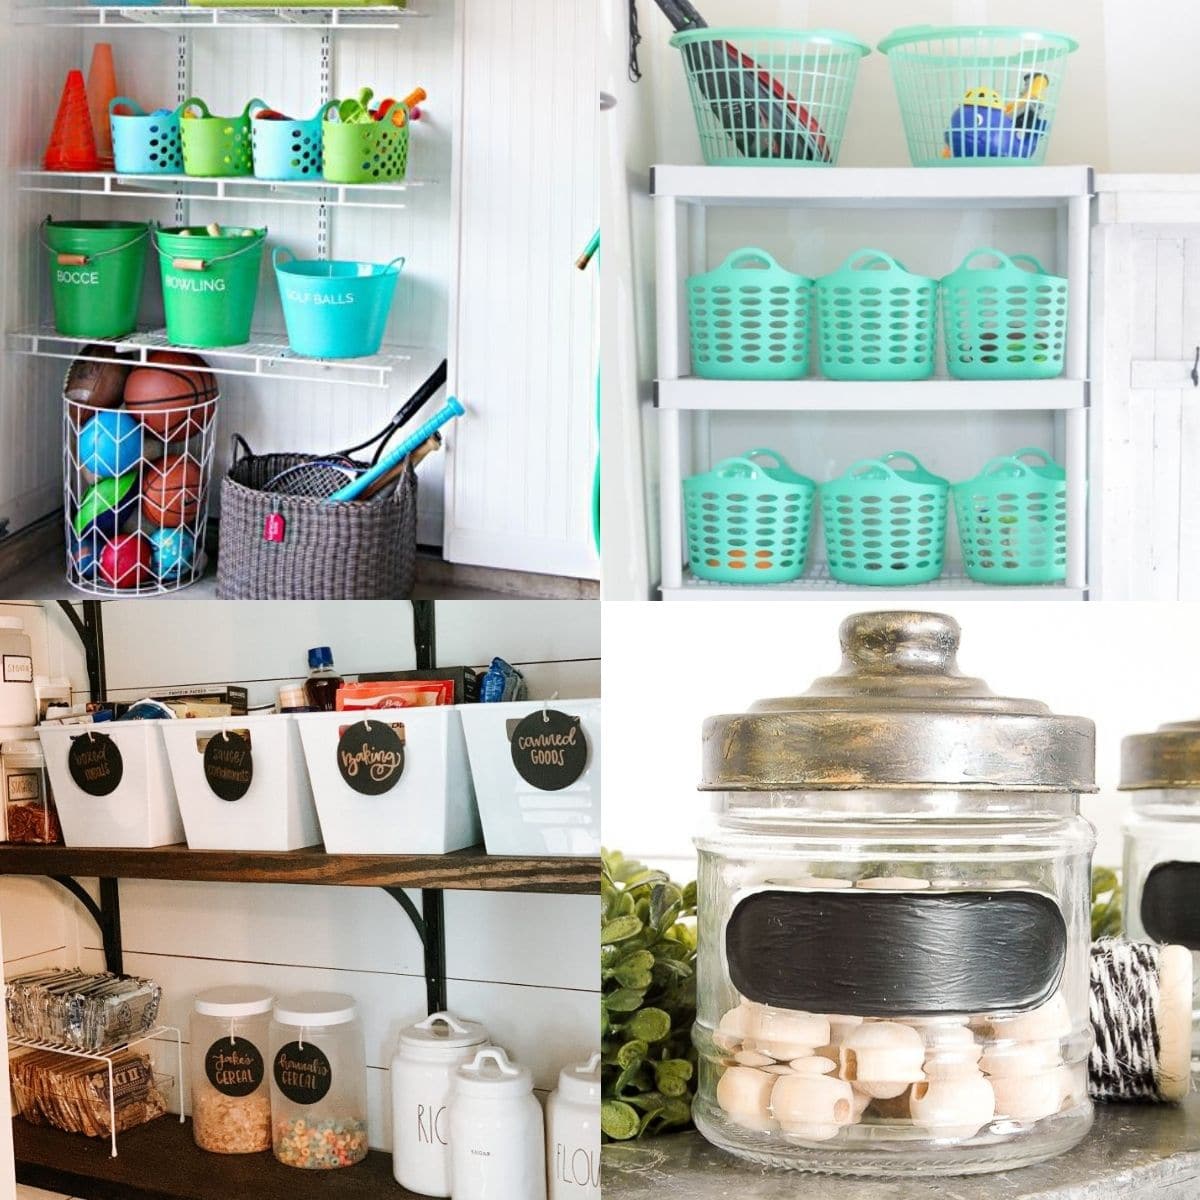 Increase storage with these Dollar Tree storage hacks.

These simple organizing tips are fun, budget-friendly, and look extra cute. 😉

#Storage #StorageIdeas #DollarTree #DollarTreeStorageIdeas

 LocalInfoForYou.com/149618/dollar-…